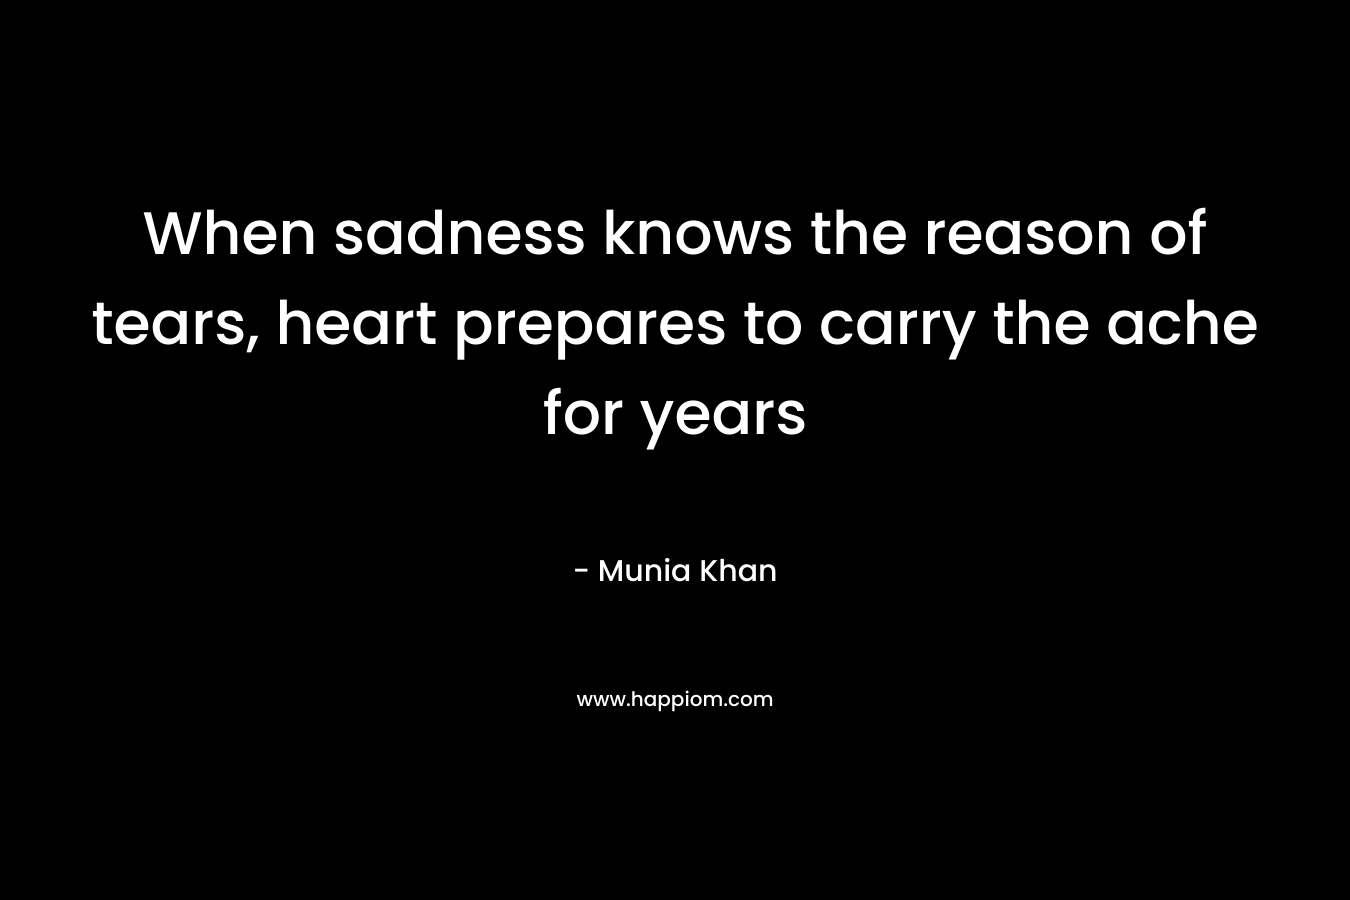 When sadness knows the reason of tears, heart prepares to carry the ache for years